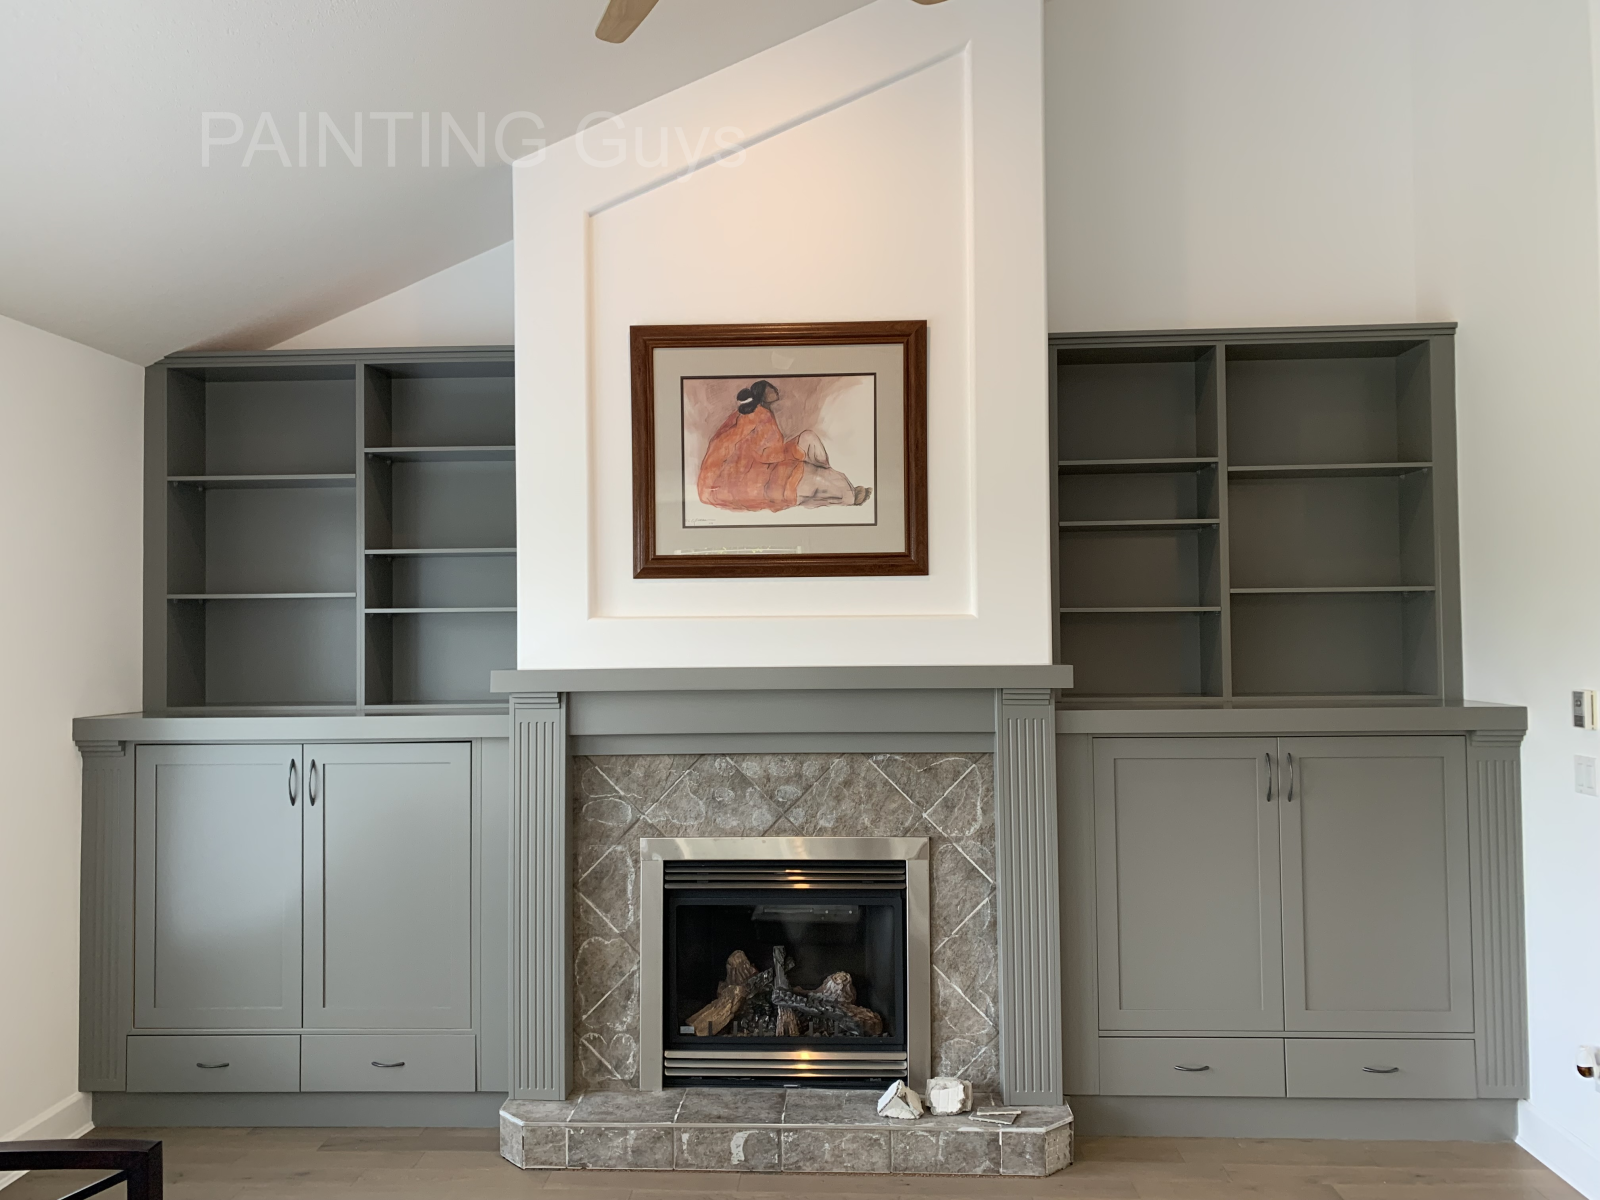 Painting fireplace-built-in cabinets after